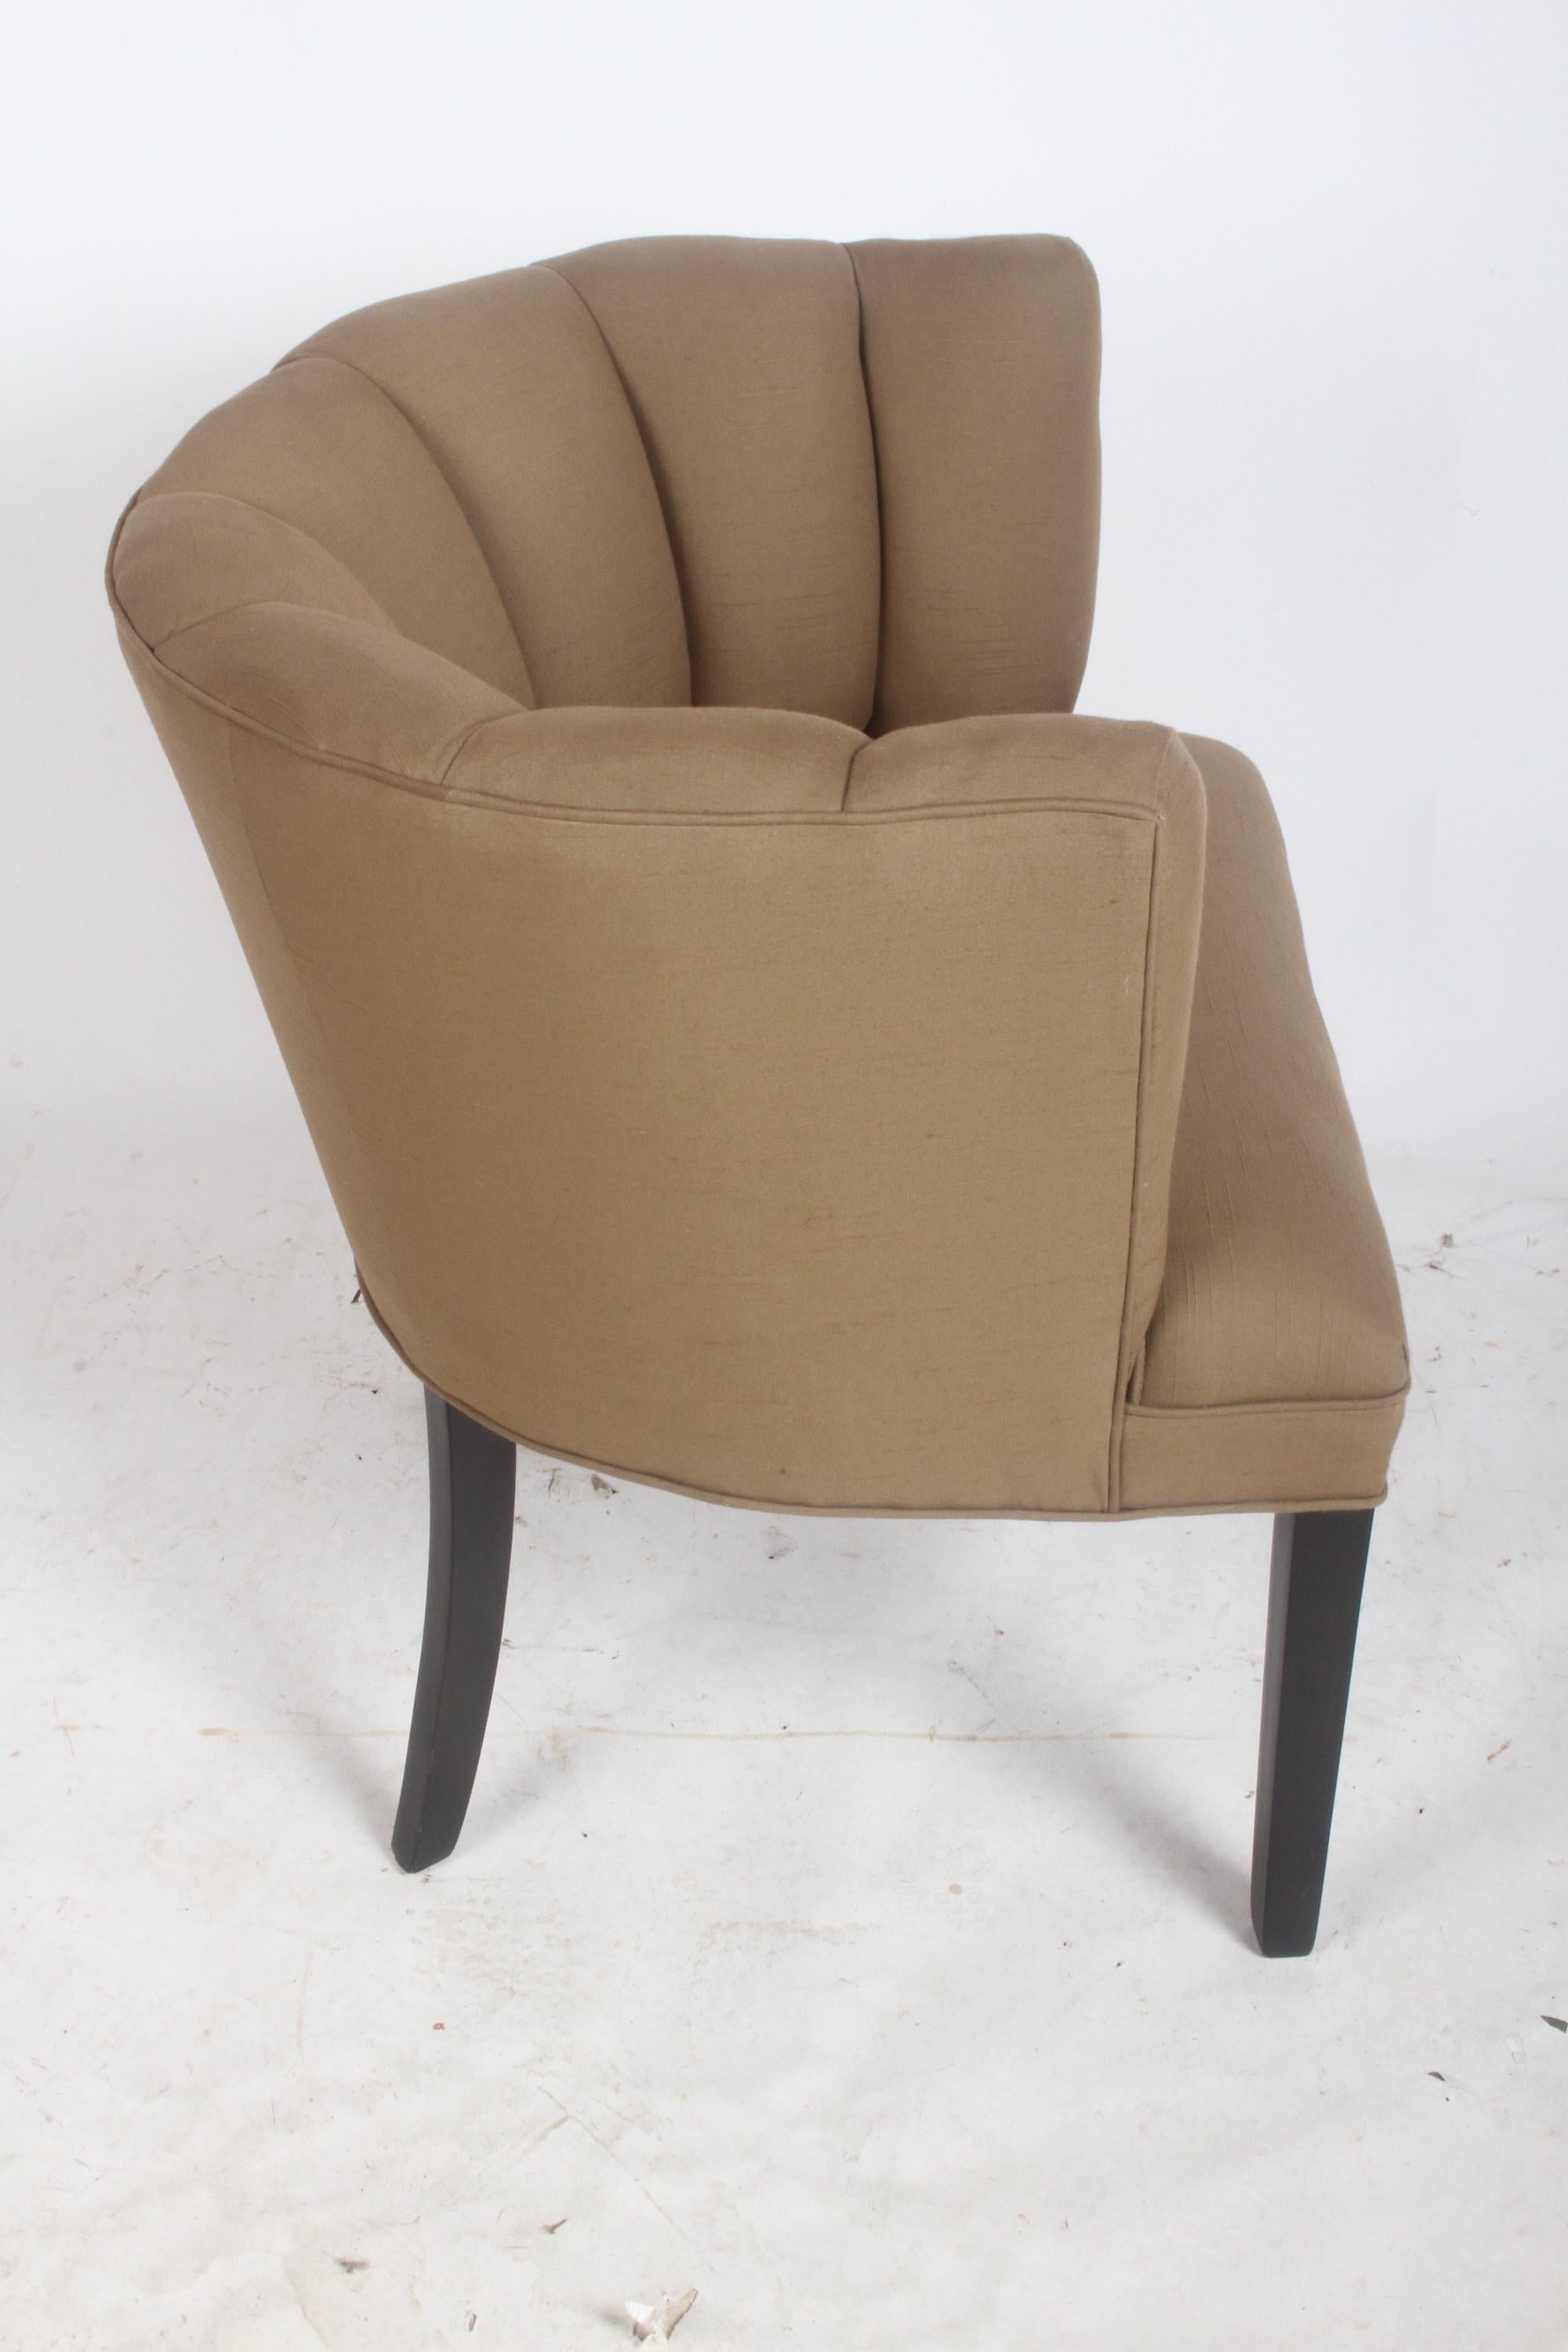 Fabulous 1940s Billy Haines Style Channel Back Occasional Tub Chair - Restored  For Sale 3